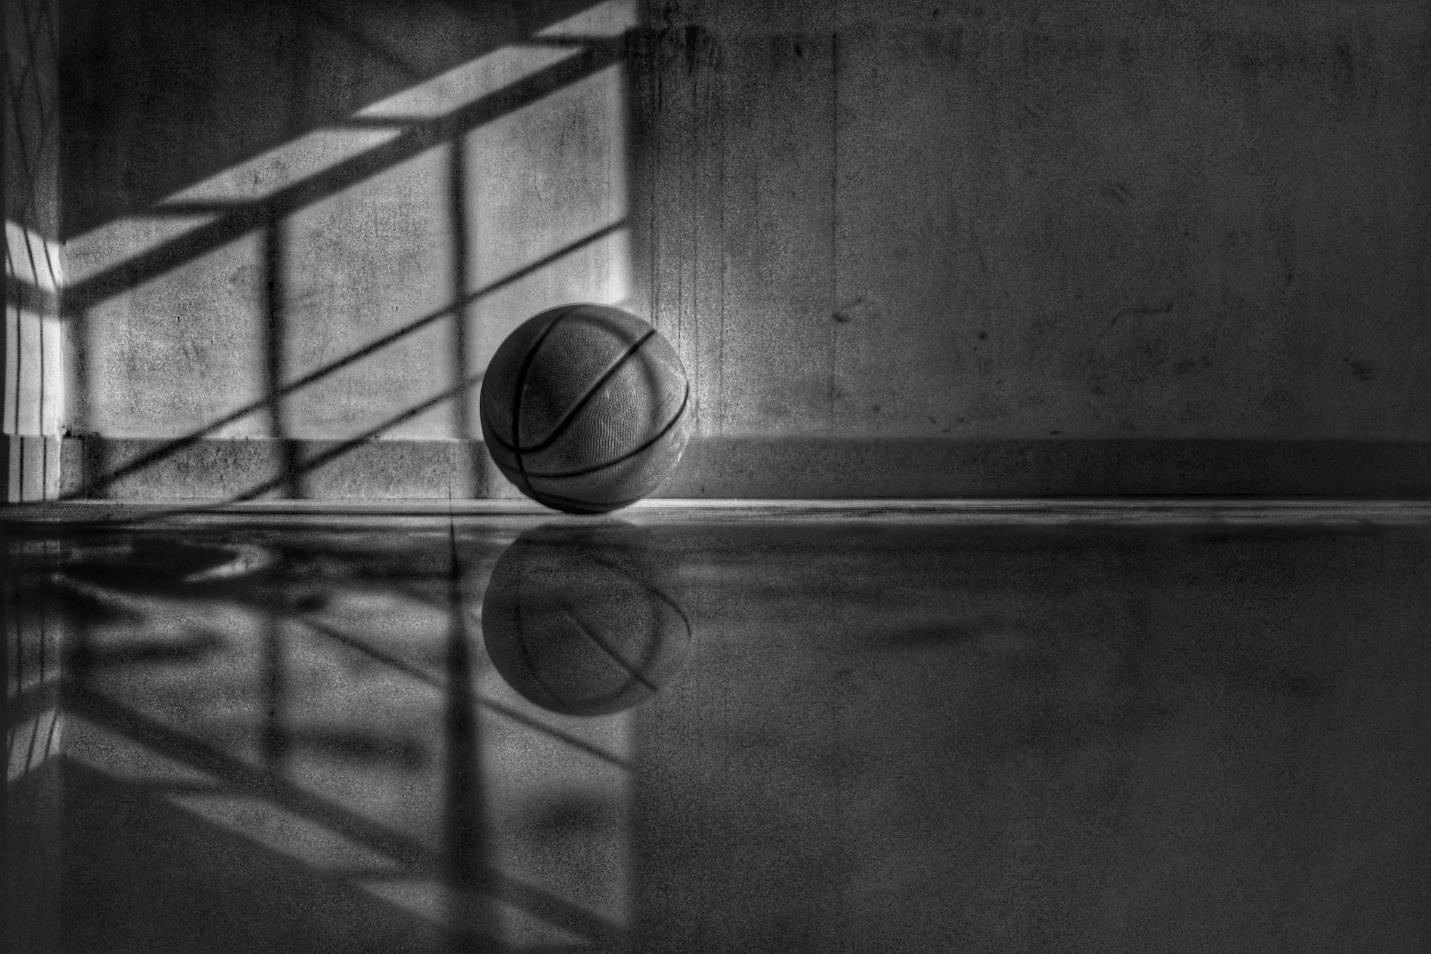 Black and White Image of a Basketball